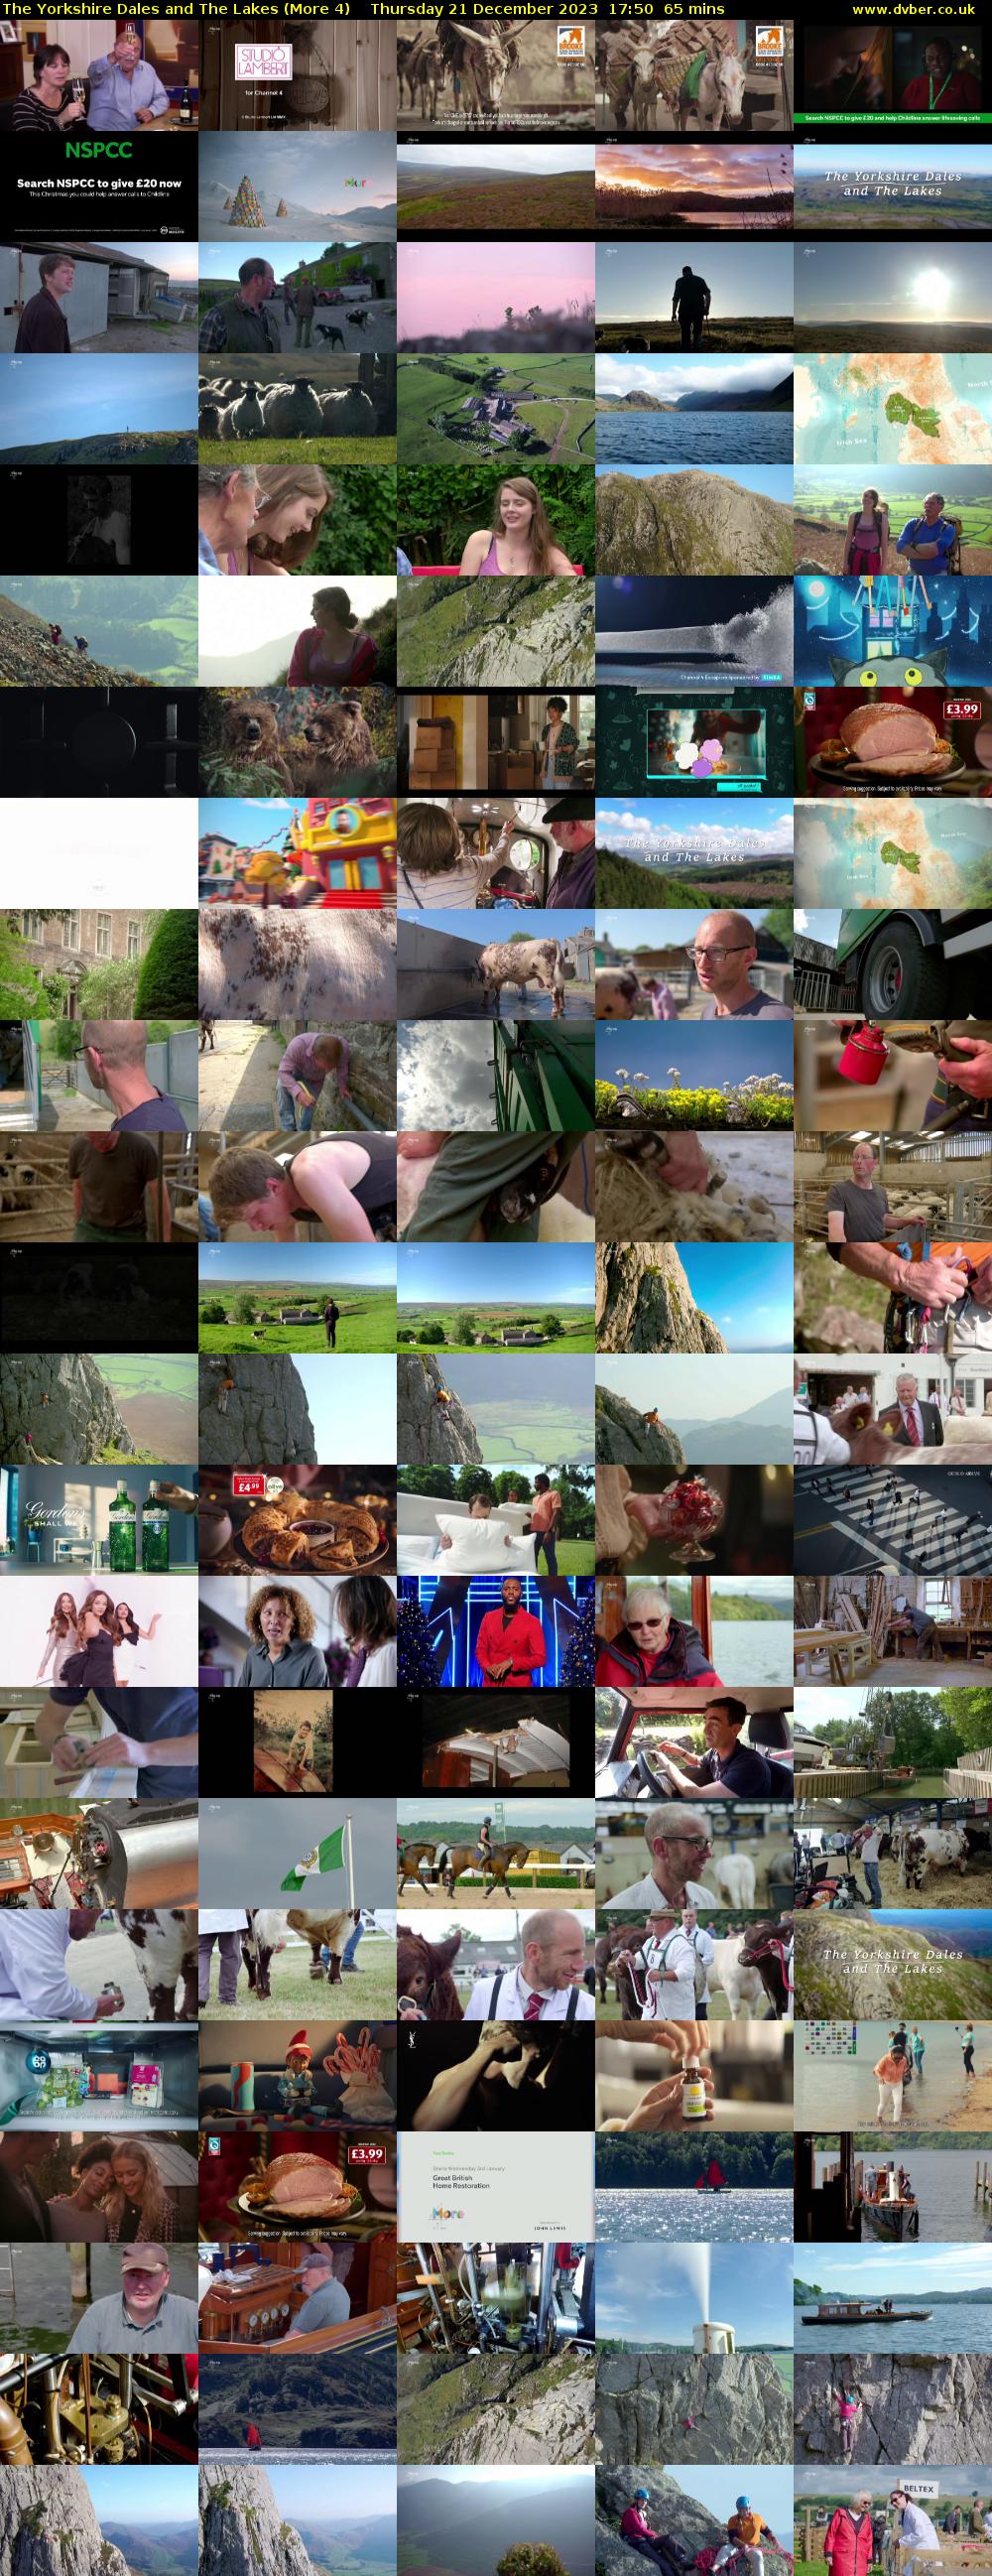 The Yorkshire Dales and The Lakes (More 4) Thursday 21 December 2023 17:50 - 18:55